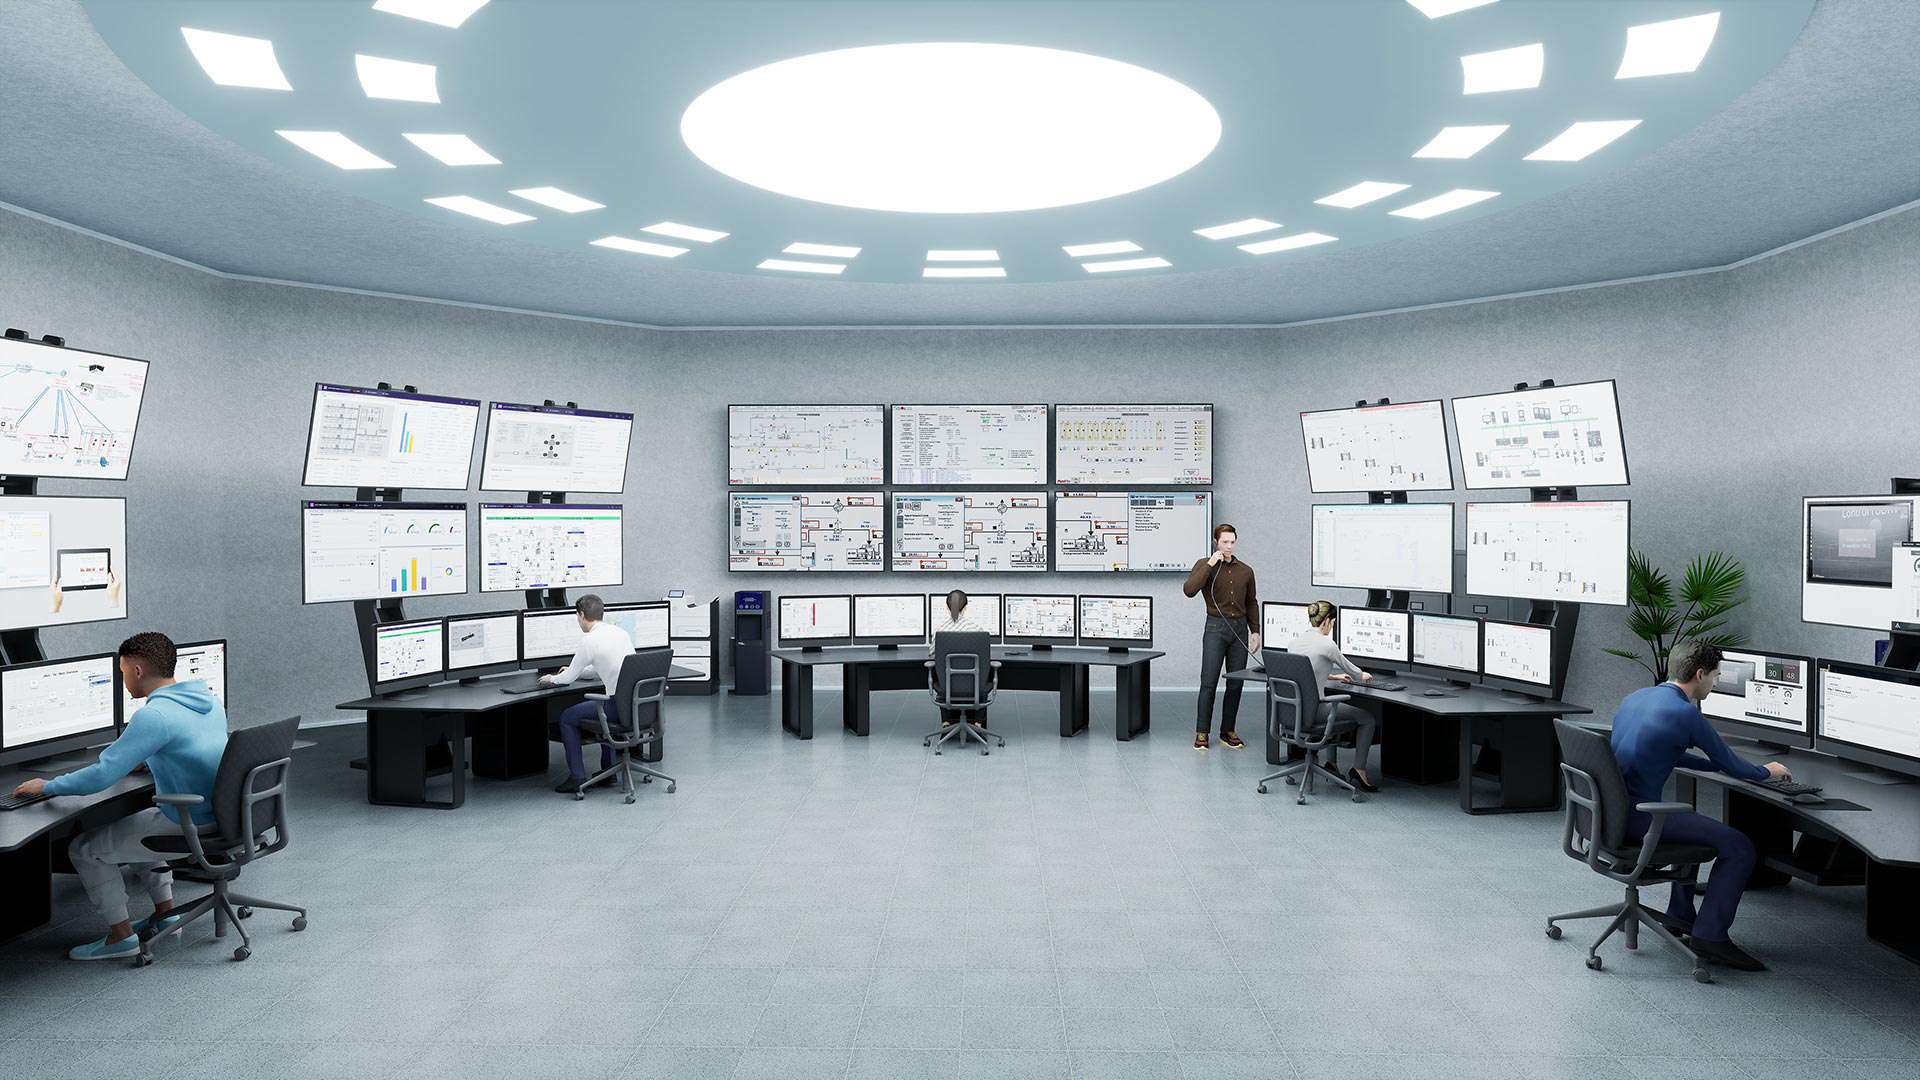 A 3D rendering of an industrial control room.